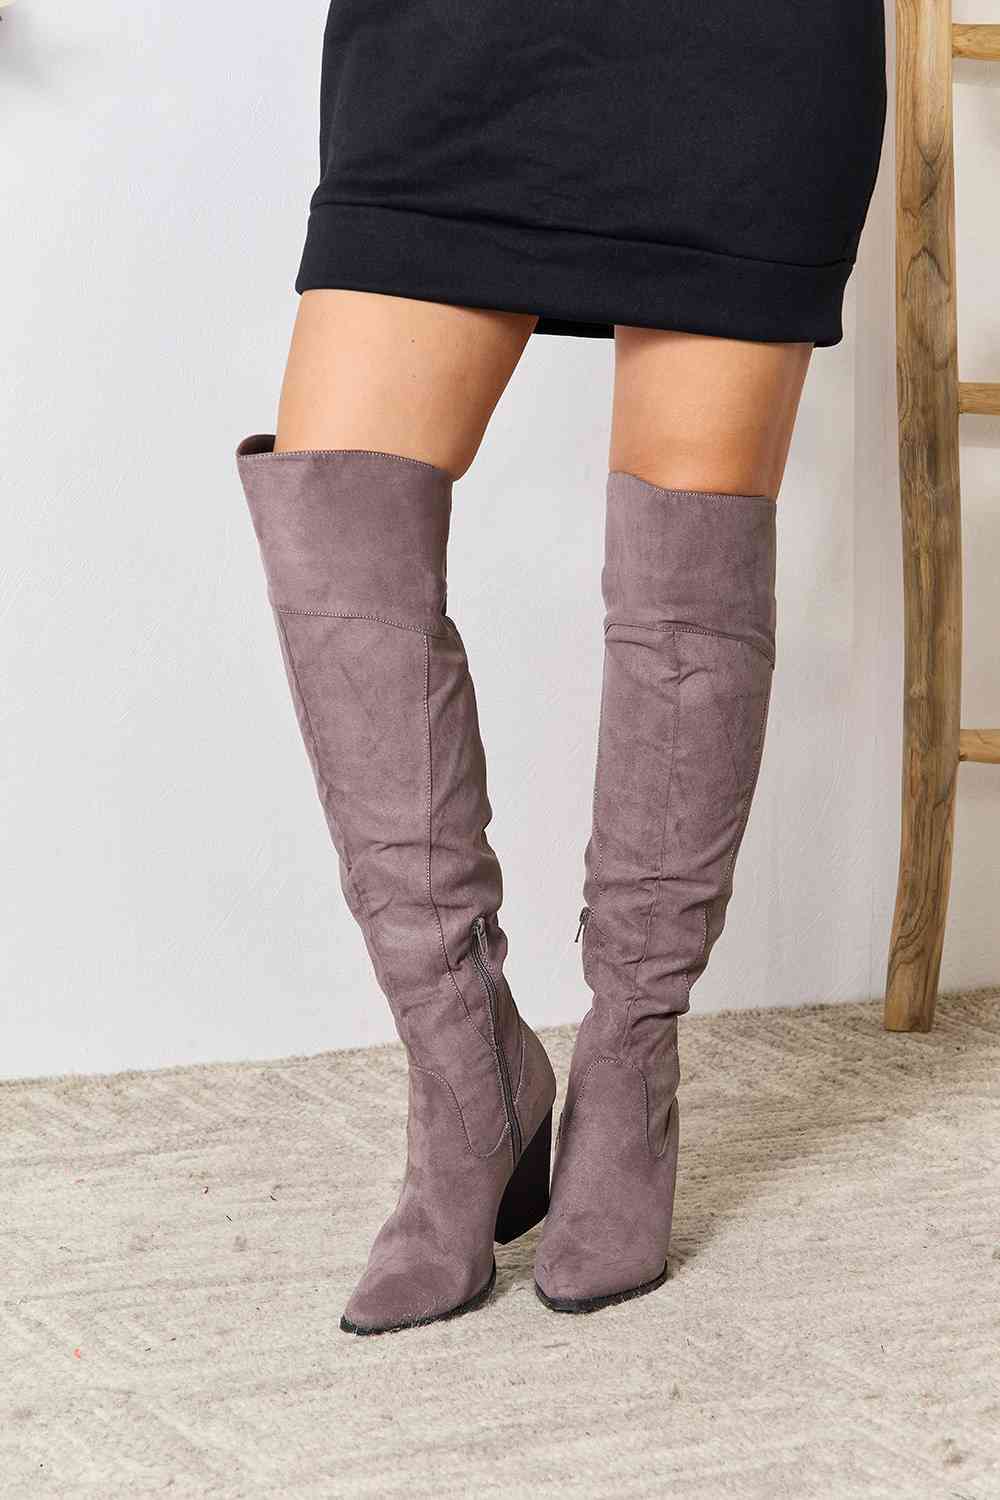 Light Gray East Lion Corp Block Heel Knee High Boots Sentient Beauty Fashions Shoes